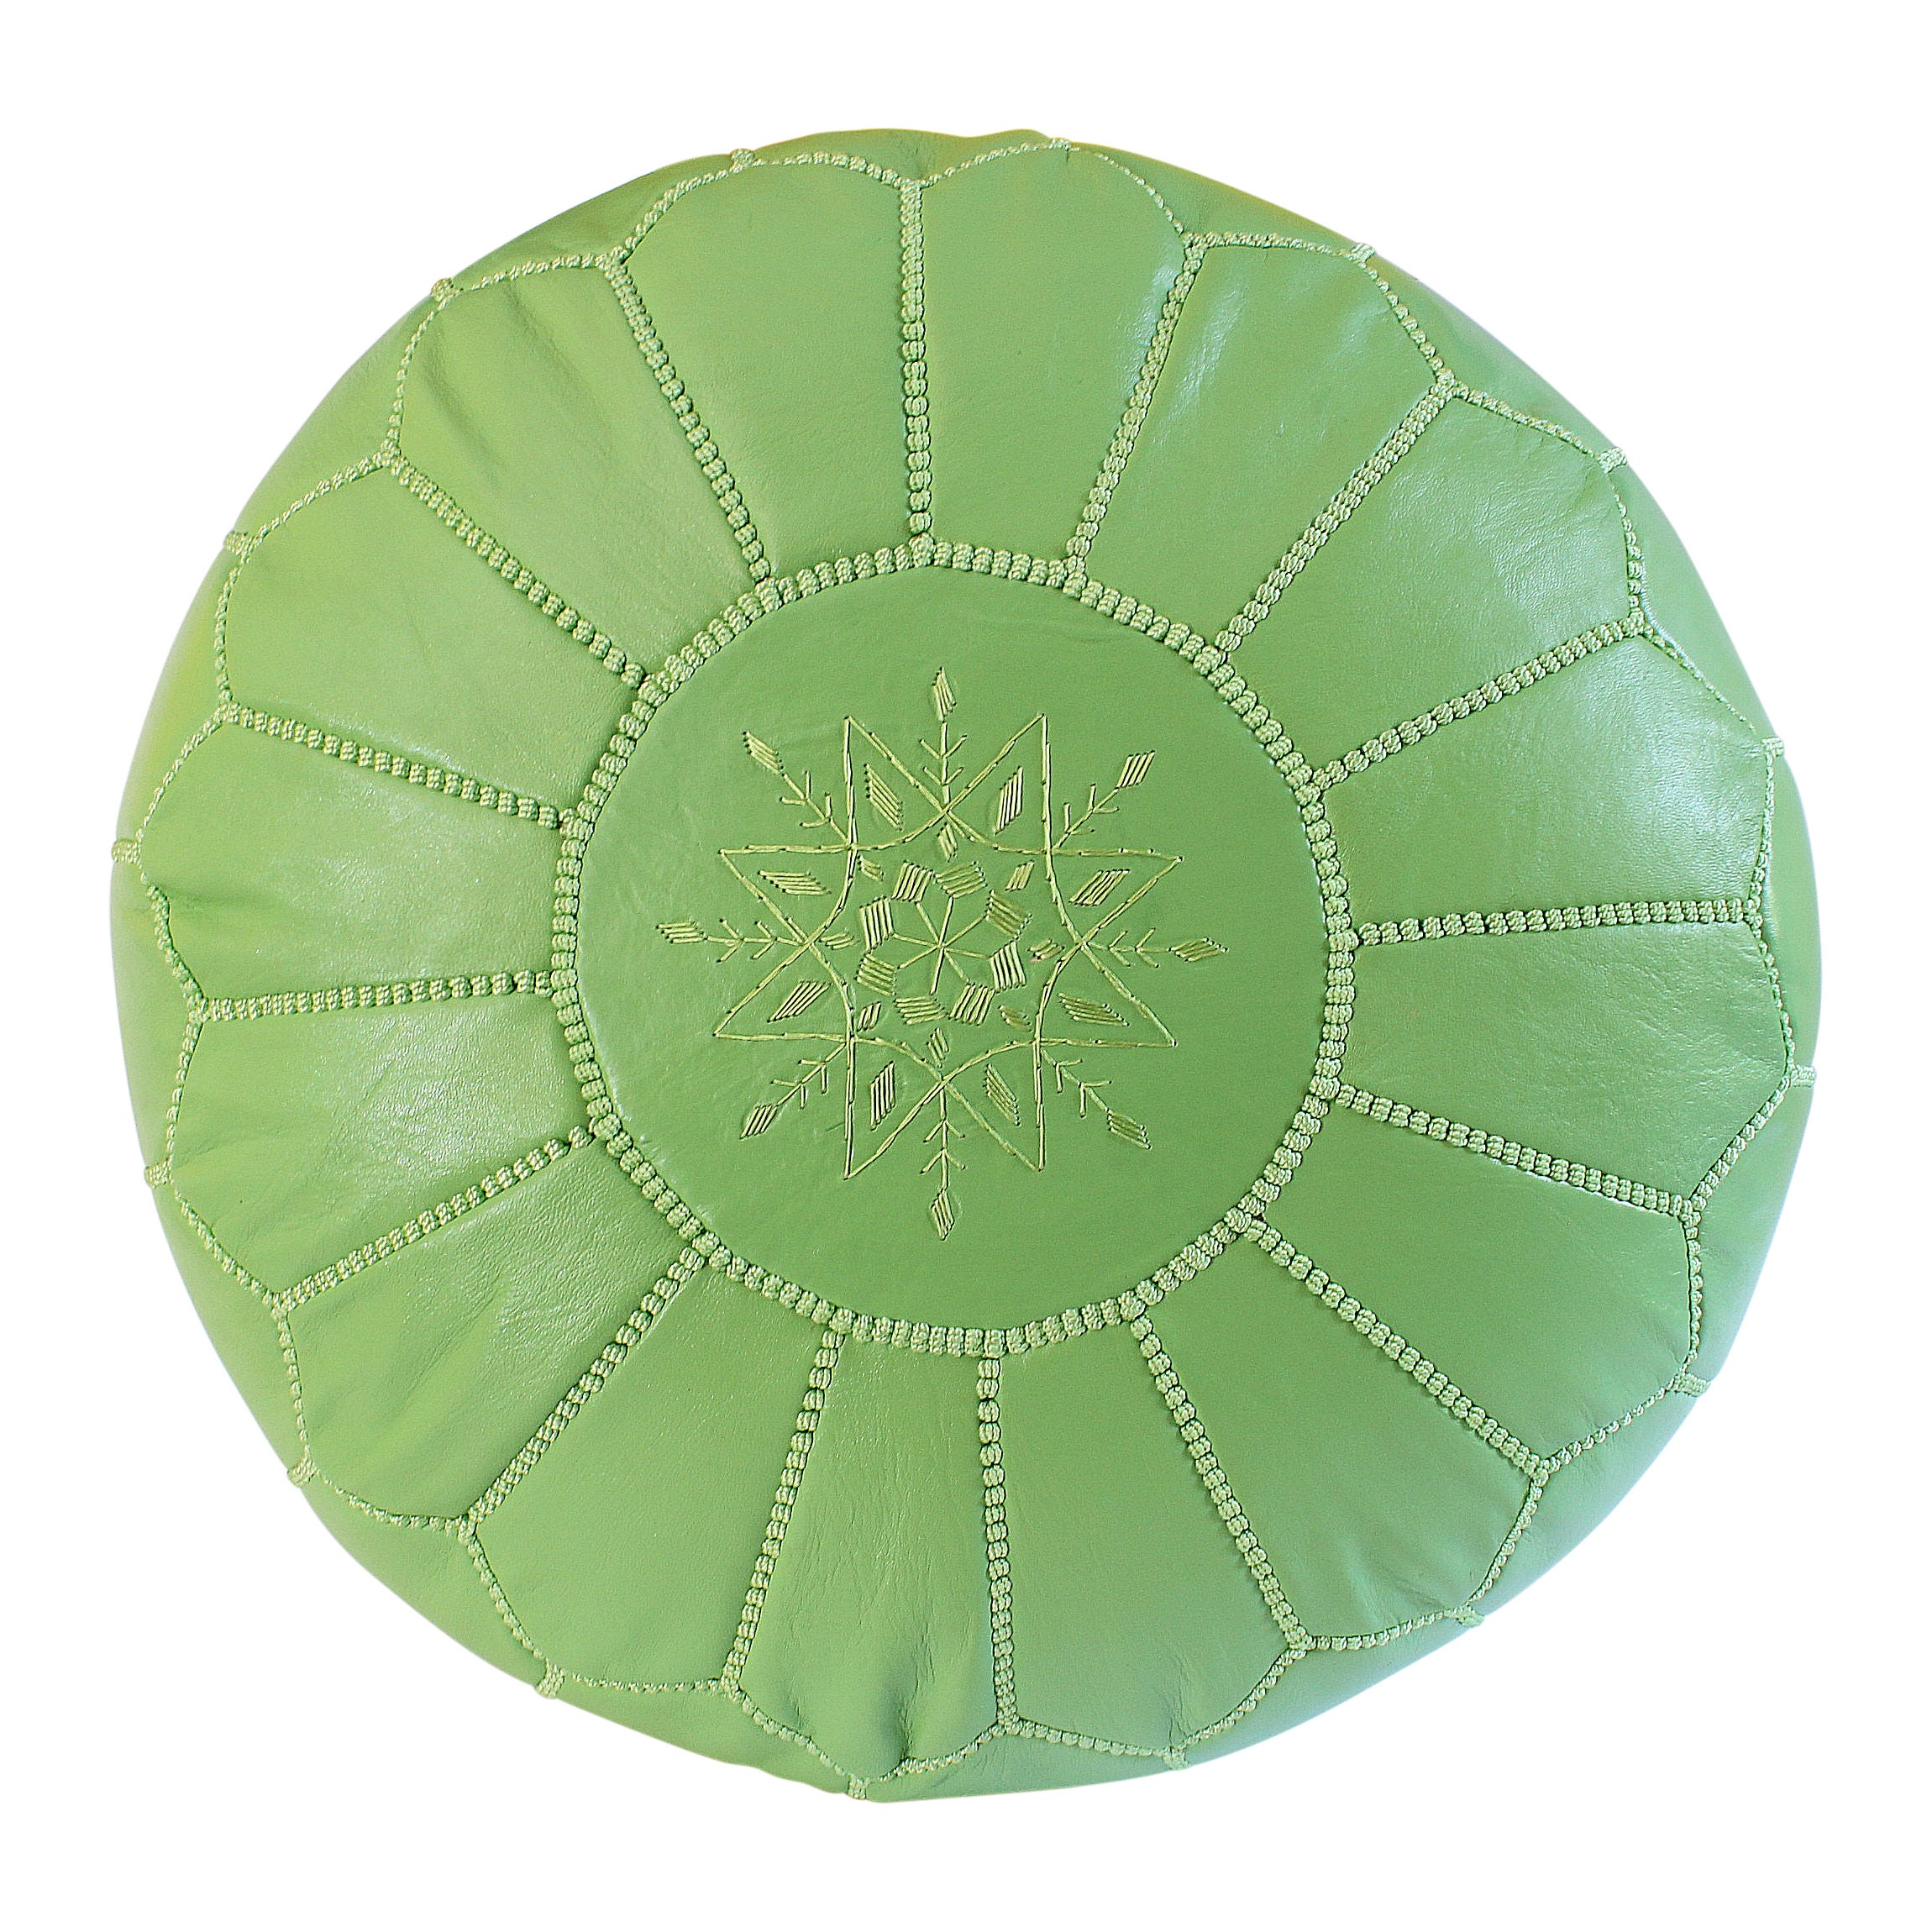 Premium New Moroccan Leather Ottoman Pouffe Pouf Footstool In Emerald Green 